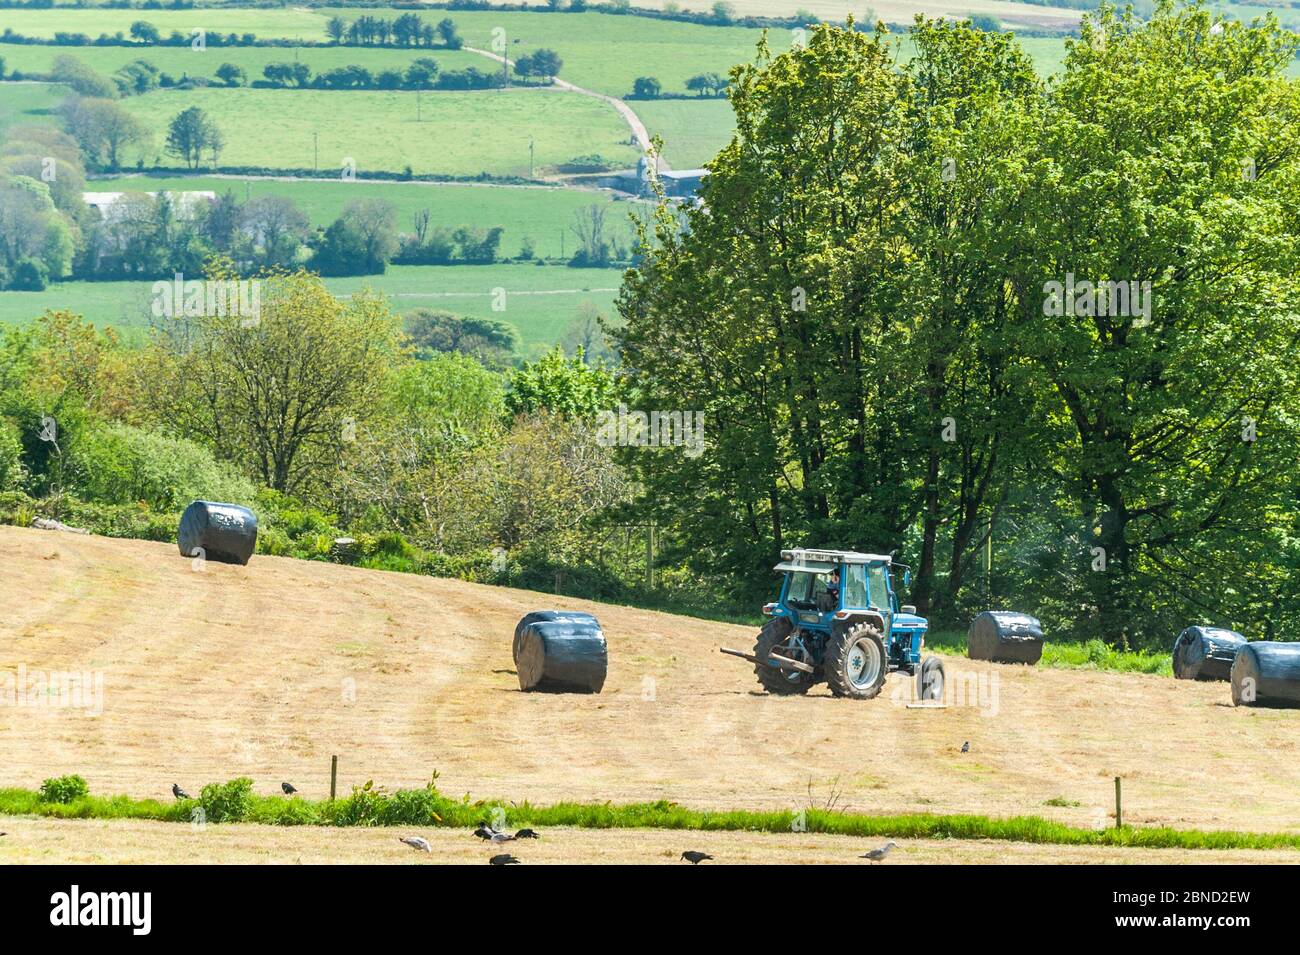 Timoleague, West Cork, Ireland. 14th May, 2020. A tractor stacks a silage bail in Timoleague on a warm sunny day. The silage will be used for winter feed for cattle. Credit: AG News/Alamy Live News Stock Photo